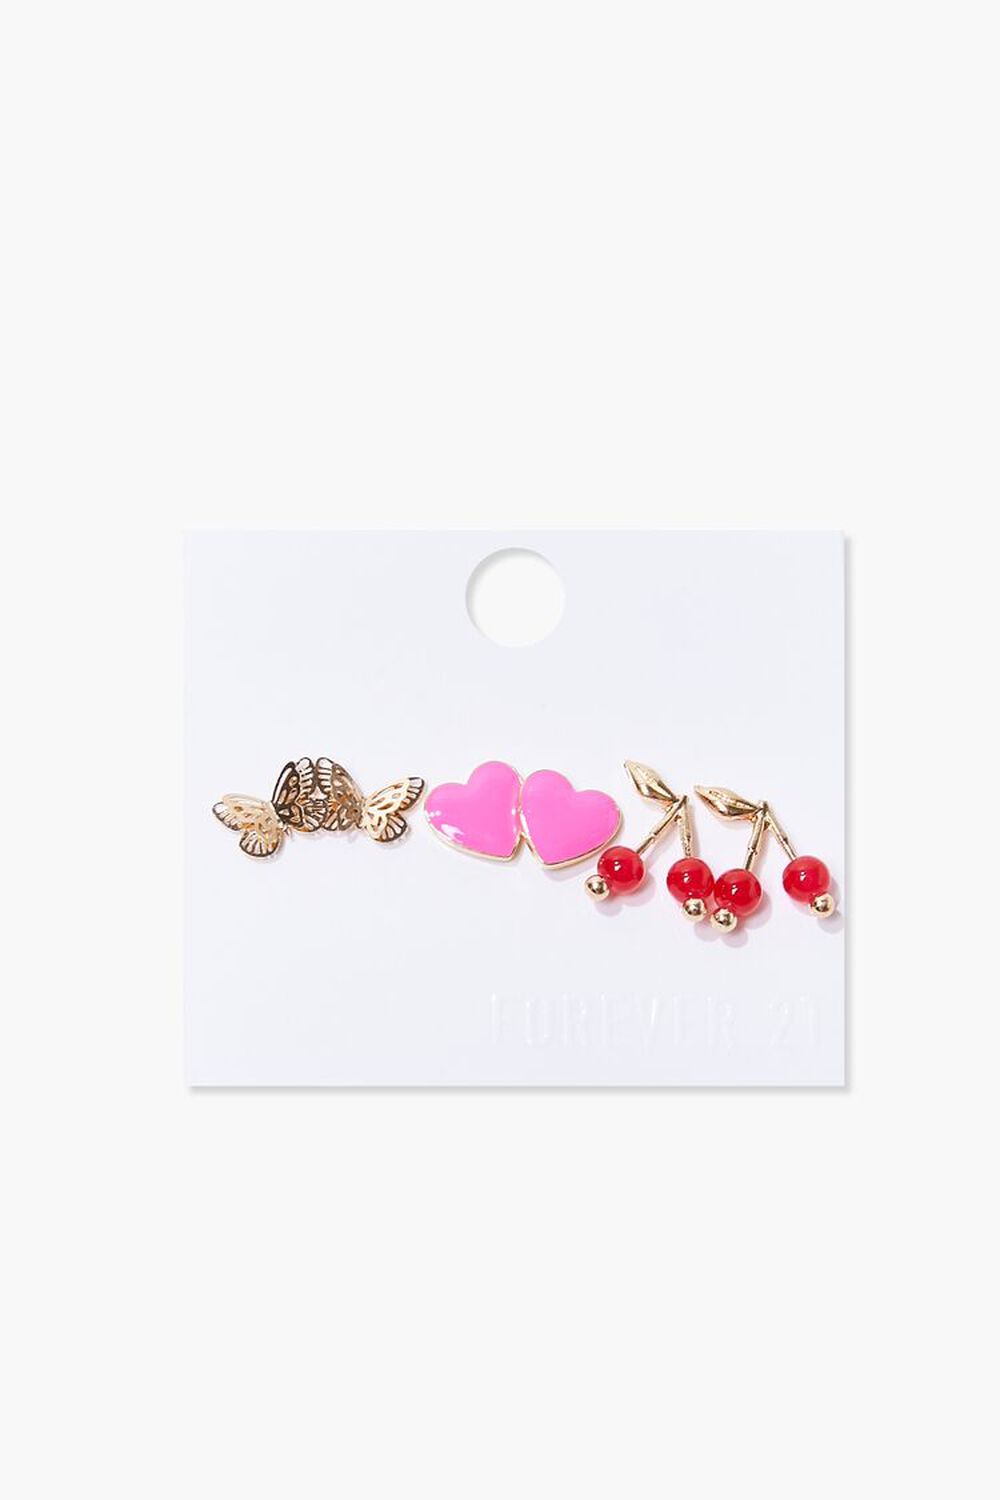 PINK/GOLD Butterfly & Heart Charm Stud Earring Set, image 1